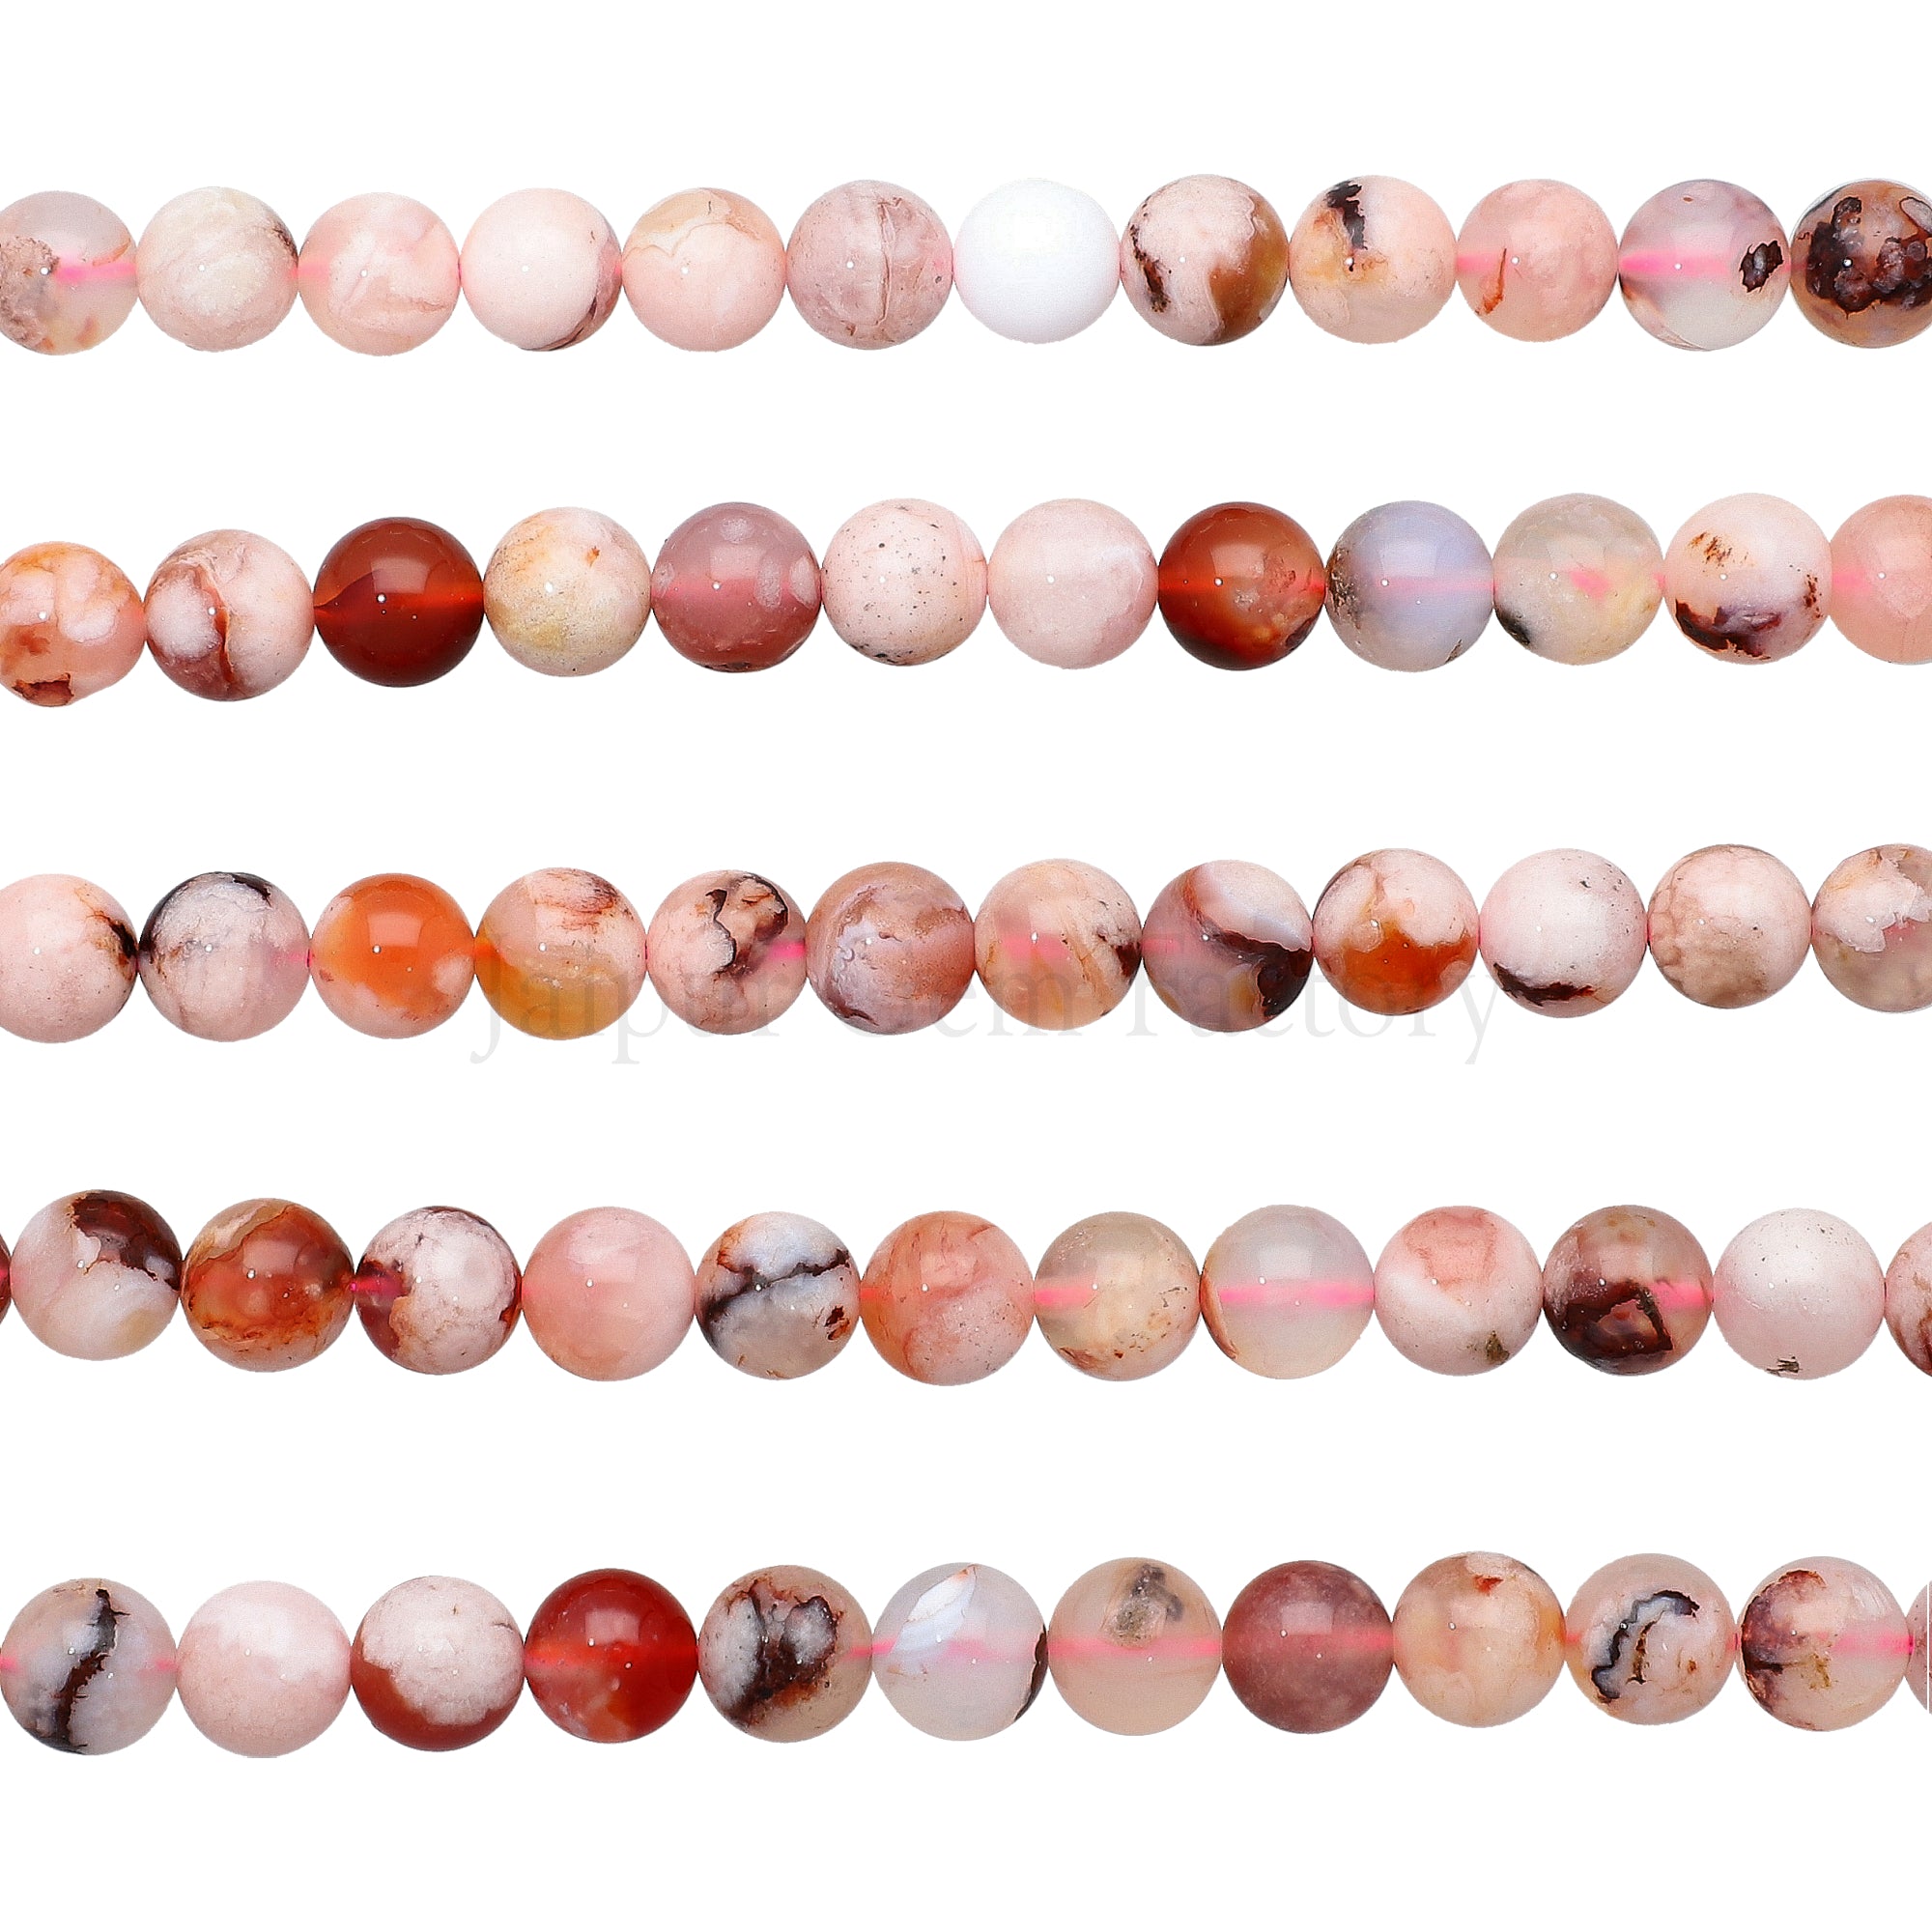 8 MM Cherry Blossom Agate Smooth Round Beads 14 Inches Strand